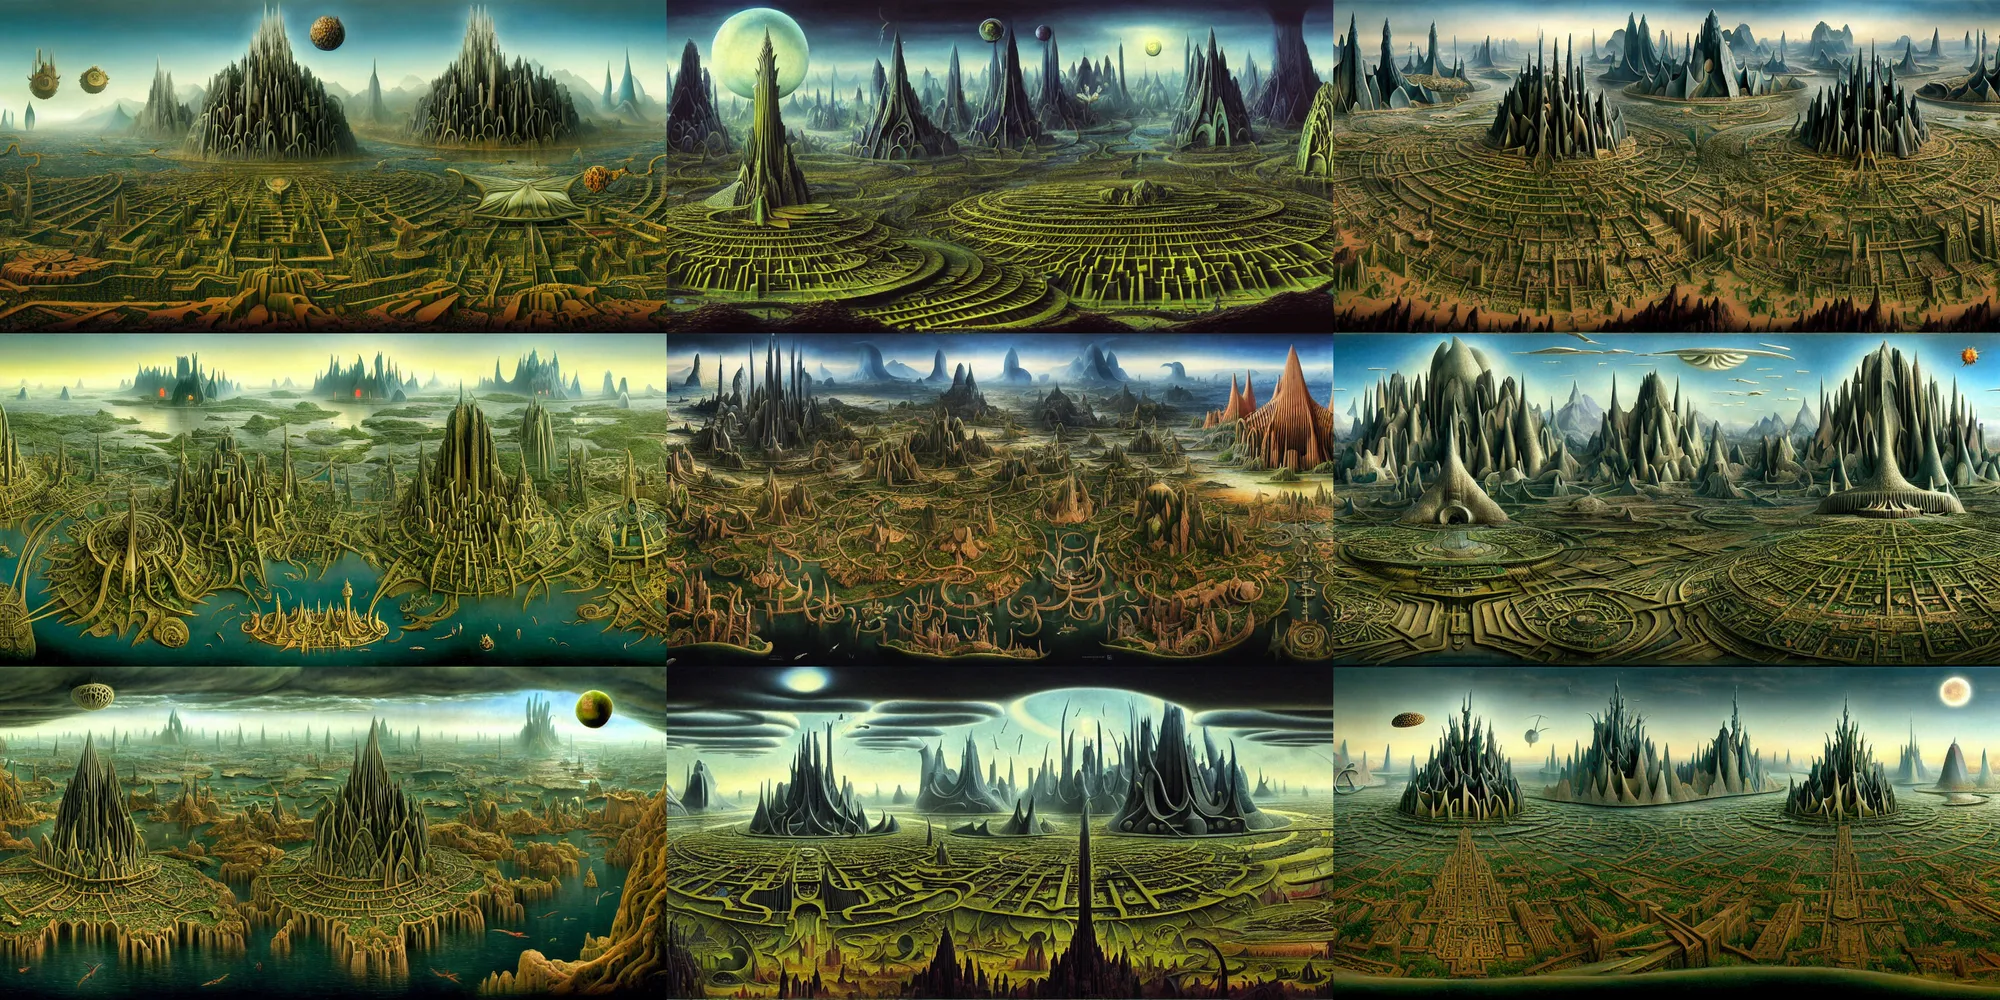 Prompt: a beautiful and insanely detailed matte painting of an advanced sprawling civilization with surreal architecture designed by Heironymous Bosch and Jim Burns, mega structures inspired by Heironymous Bosch's Garden of Earthly Delights, a beautiful and insanely detailed matte painting of an advanced sprawling civilization with surreal architecture designed by Heironymous Bosch and Jim Burns, mega structures inspired by Heironymous Bosch's Garden of Earthly Delights, a beautiful and insanely detailed matte painting of an advanced sprawling civilization with surreal architecture designed by Heironymous Bosch and Jim Burns, mega structures inspired by Heironymous Bosch's Garden of Earthly Delights, vast landscape by Jim Burns and Tyler Edlin, alien sci-fi concept art, by Jim Burns and Tyler Edlin, masterpiece!!, grand!, imaginative!!!, whimsical!!, epic scale, intricate details, sense of awe, elite